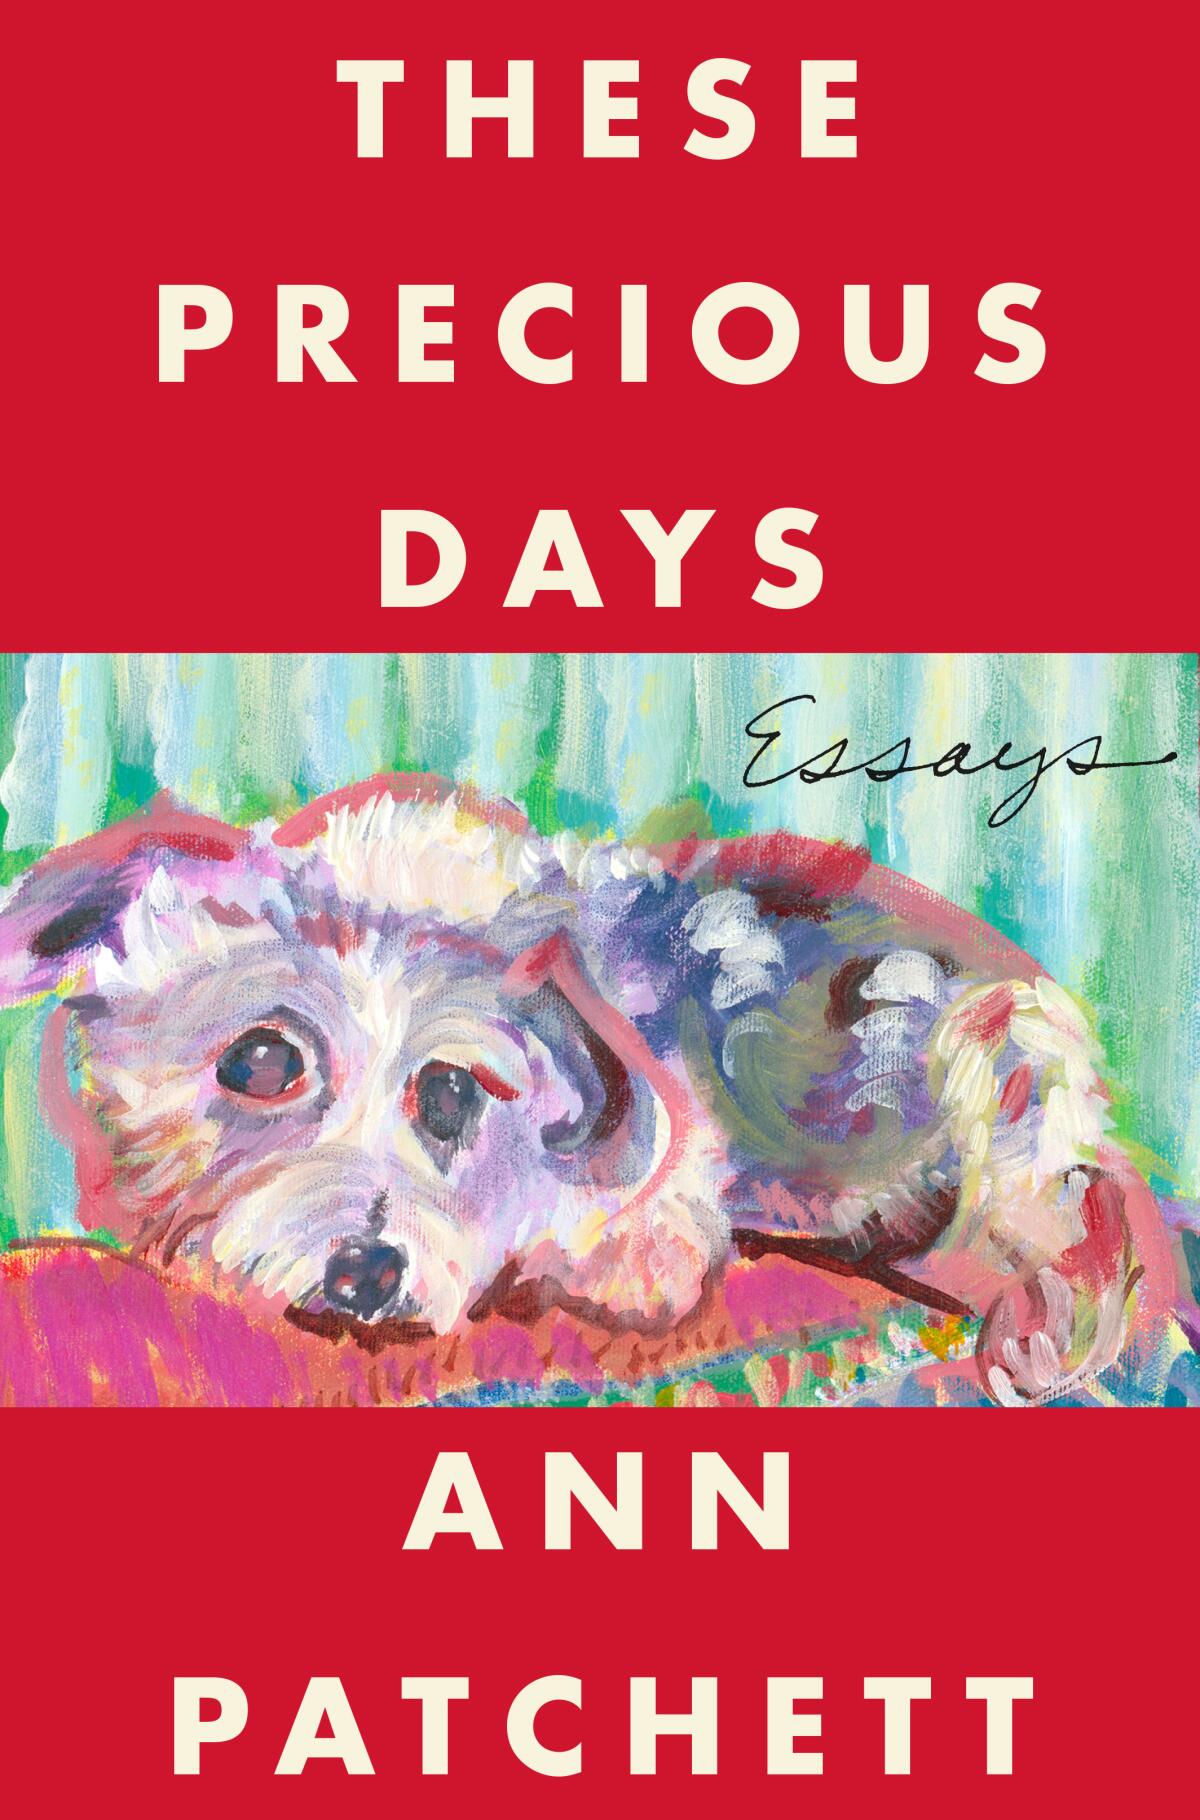 A painting of a dog on the cover of "These Precious Days," by Ann Patchett